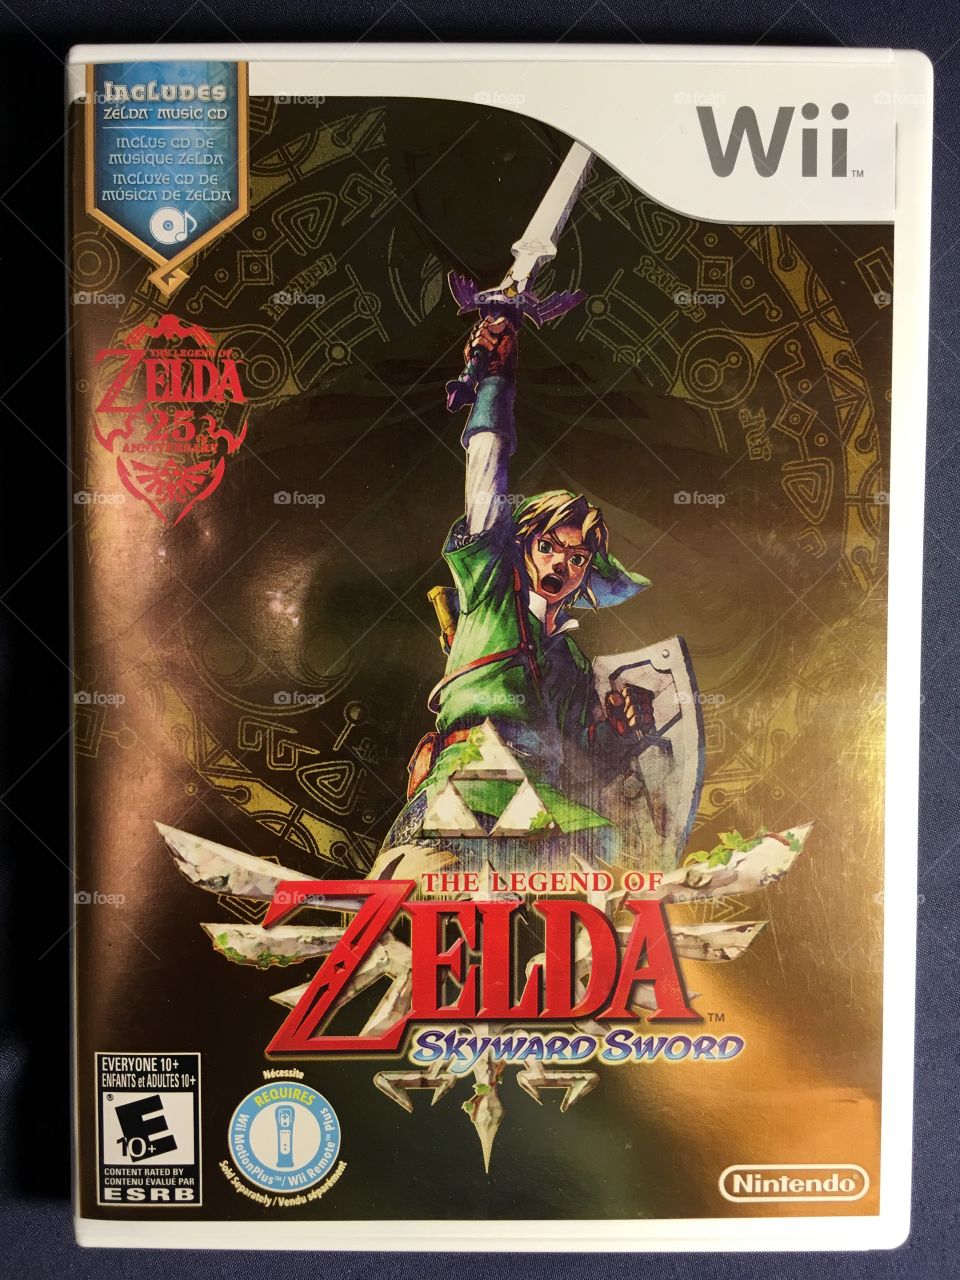 The Legend of Zelda Skyward Sword with music cd  video game for the Nintendo wii - released 2011